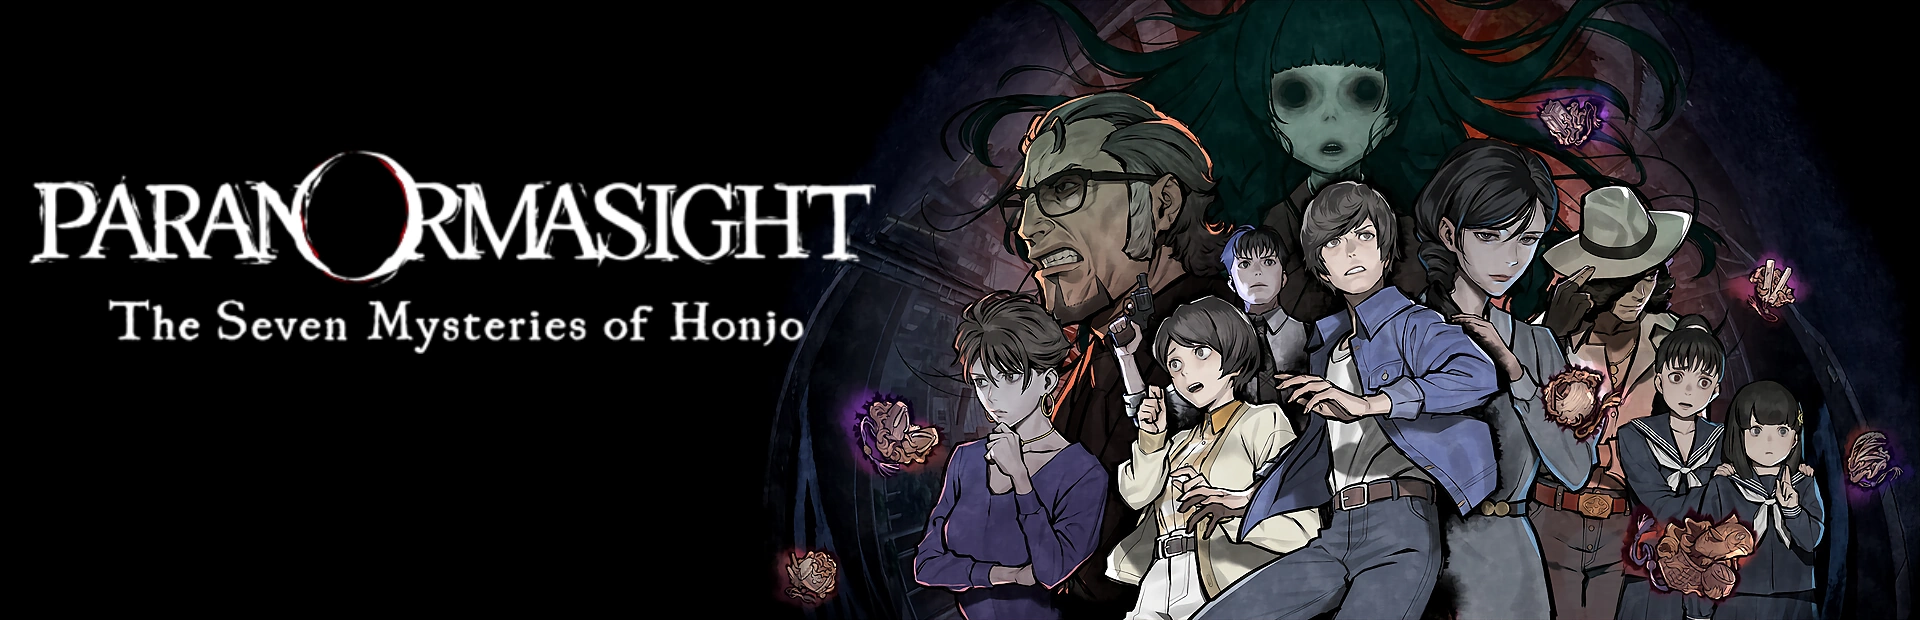 PARANORMASIGHT The.Seven .Mysteries.of .Honjo .banner3